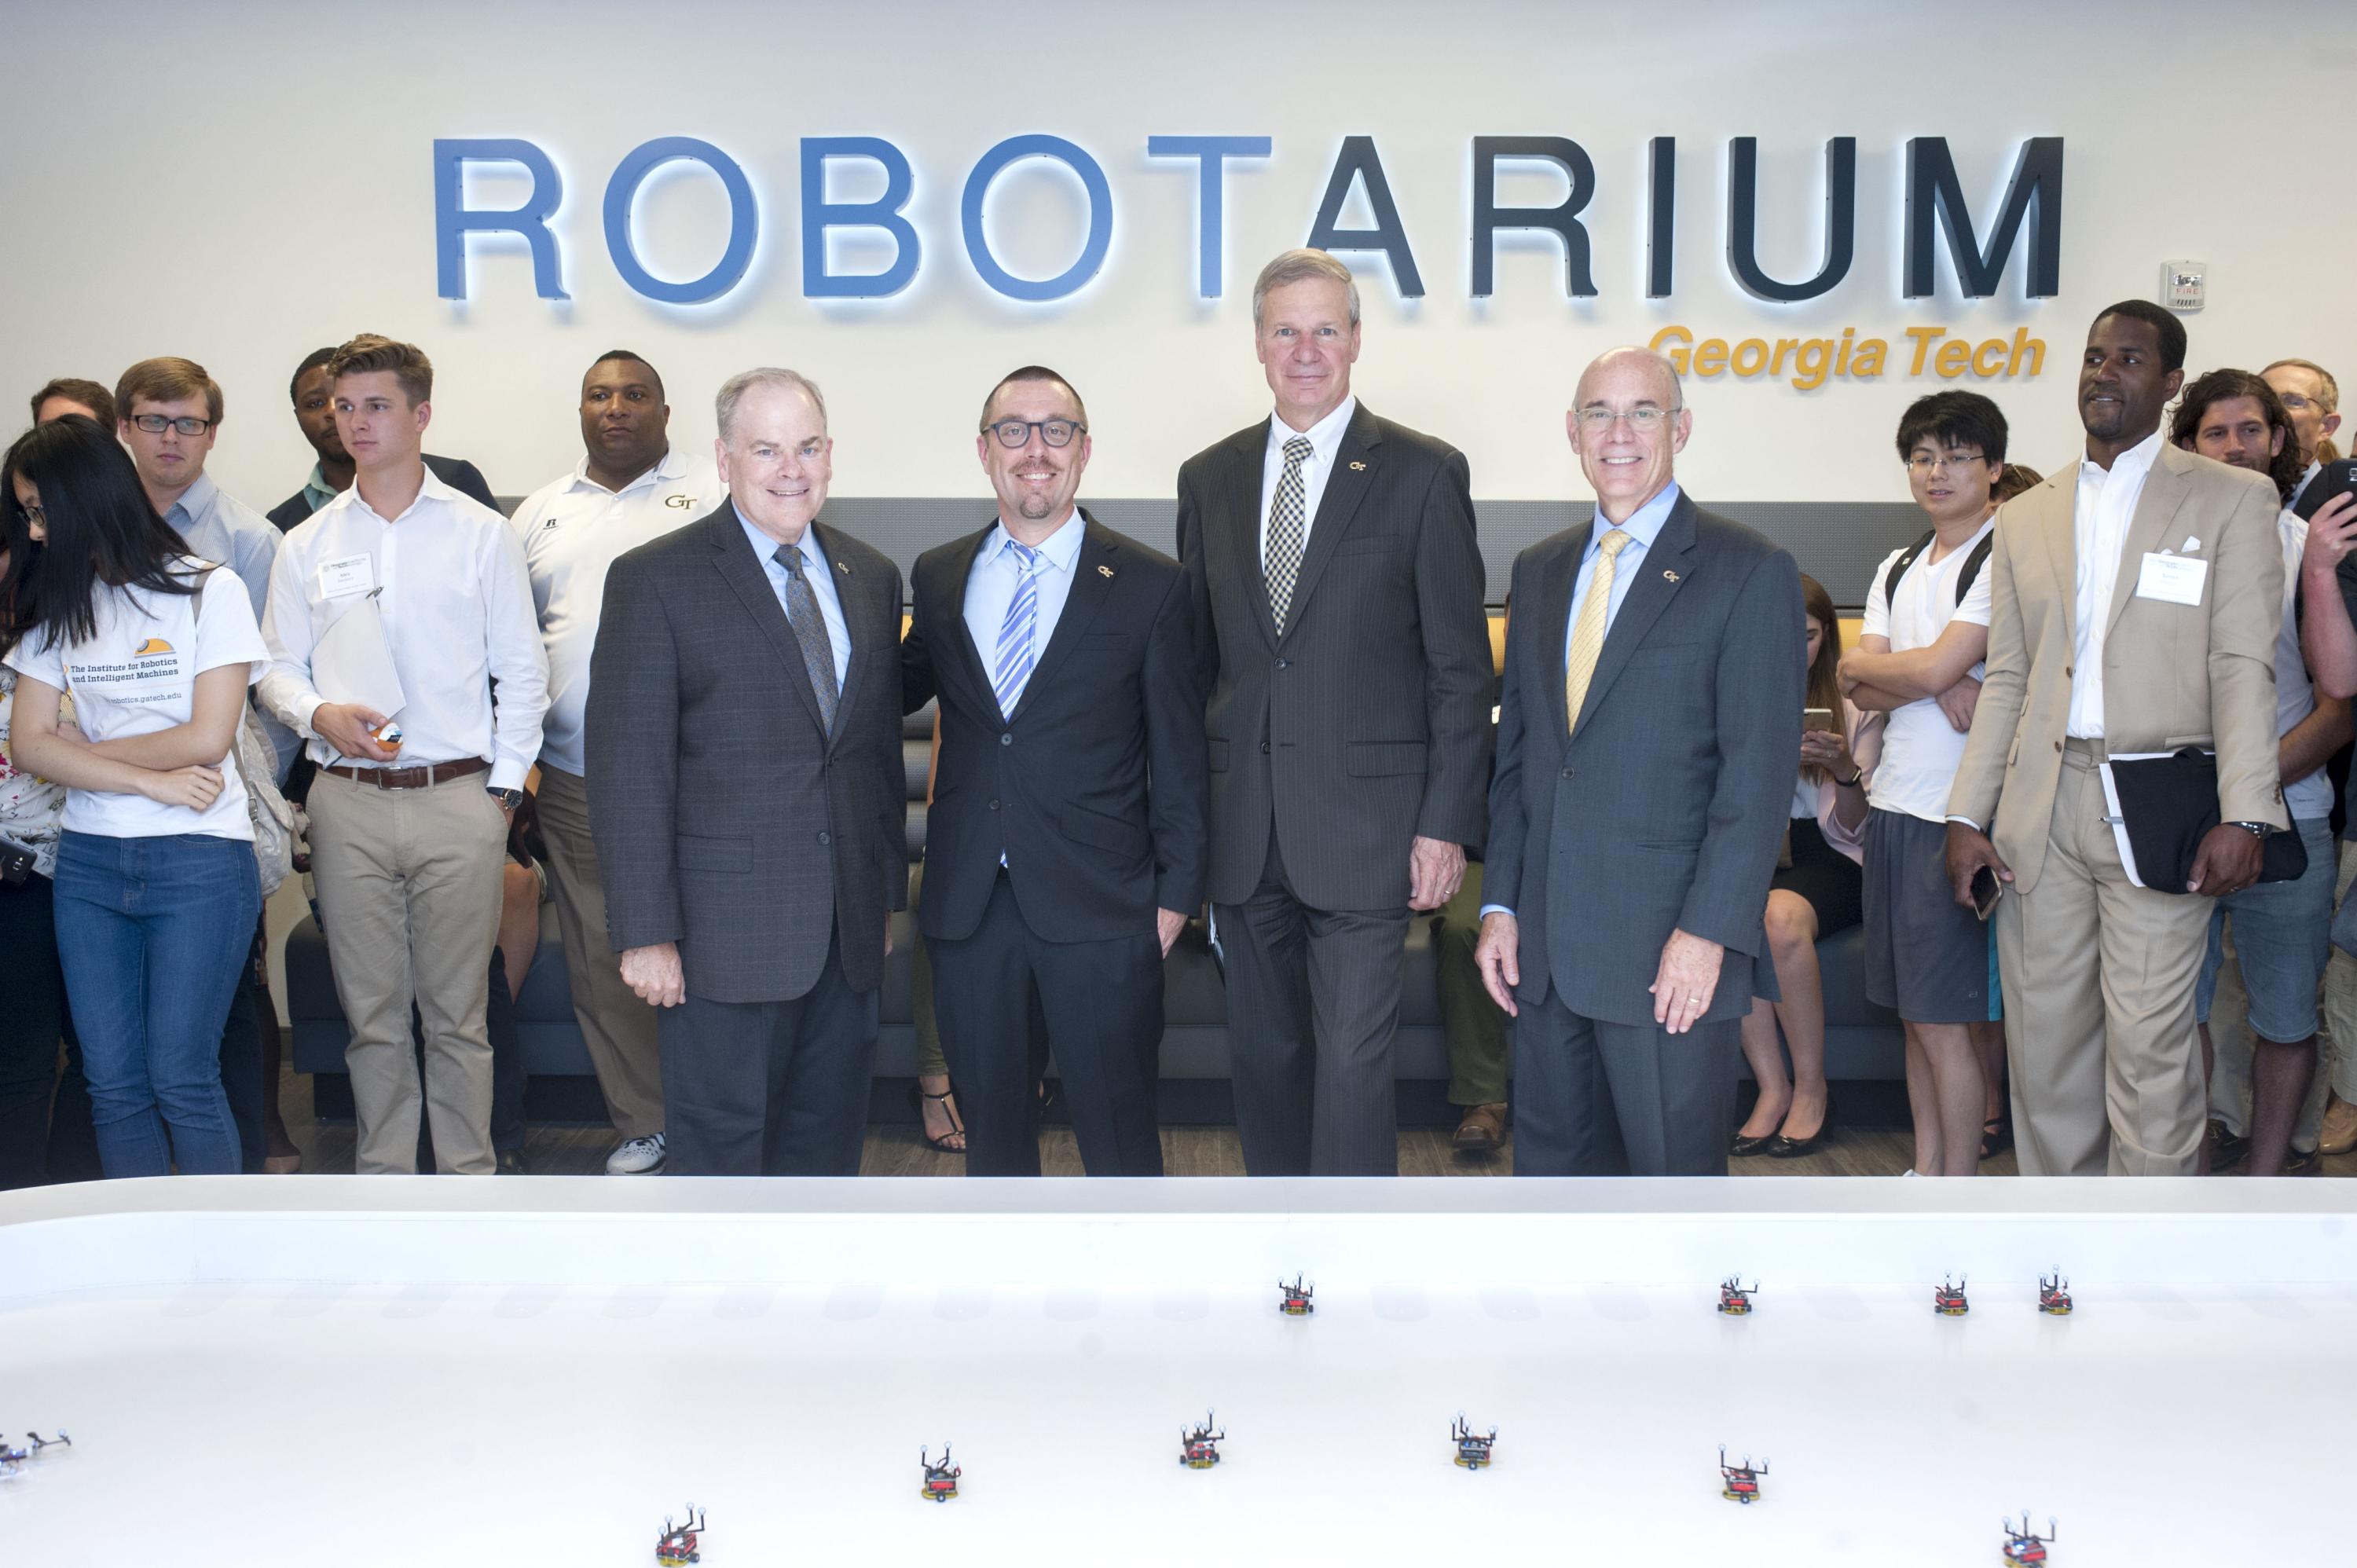 The Robotarium opens on August 22, 2017. From left to right: Steve Cross (vice president of research), Magnus Egerstedt, G.P. "Bud" Peterson and Rafael Bras (provost and executive vice president for Academic Affairs)